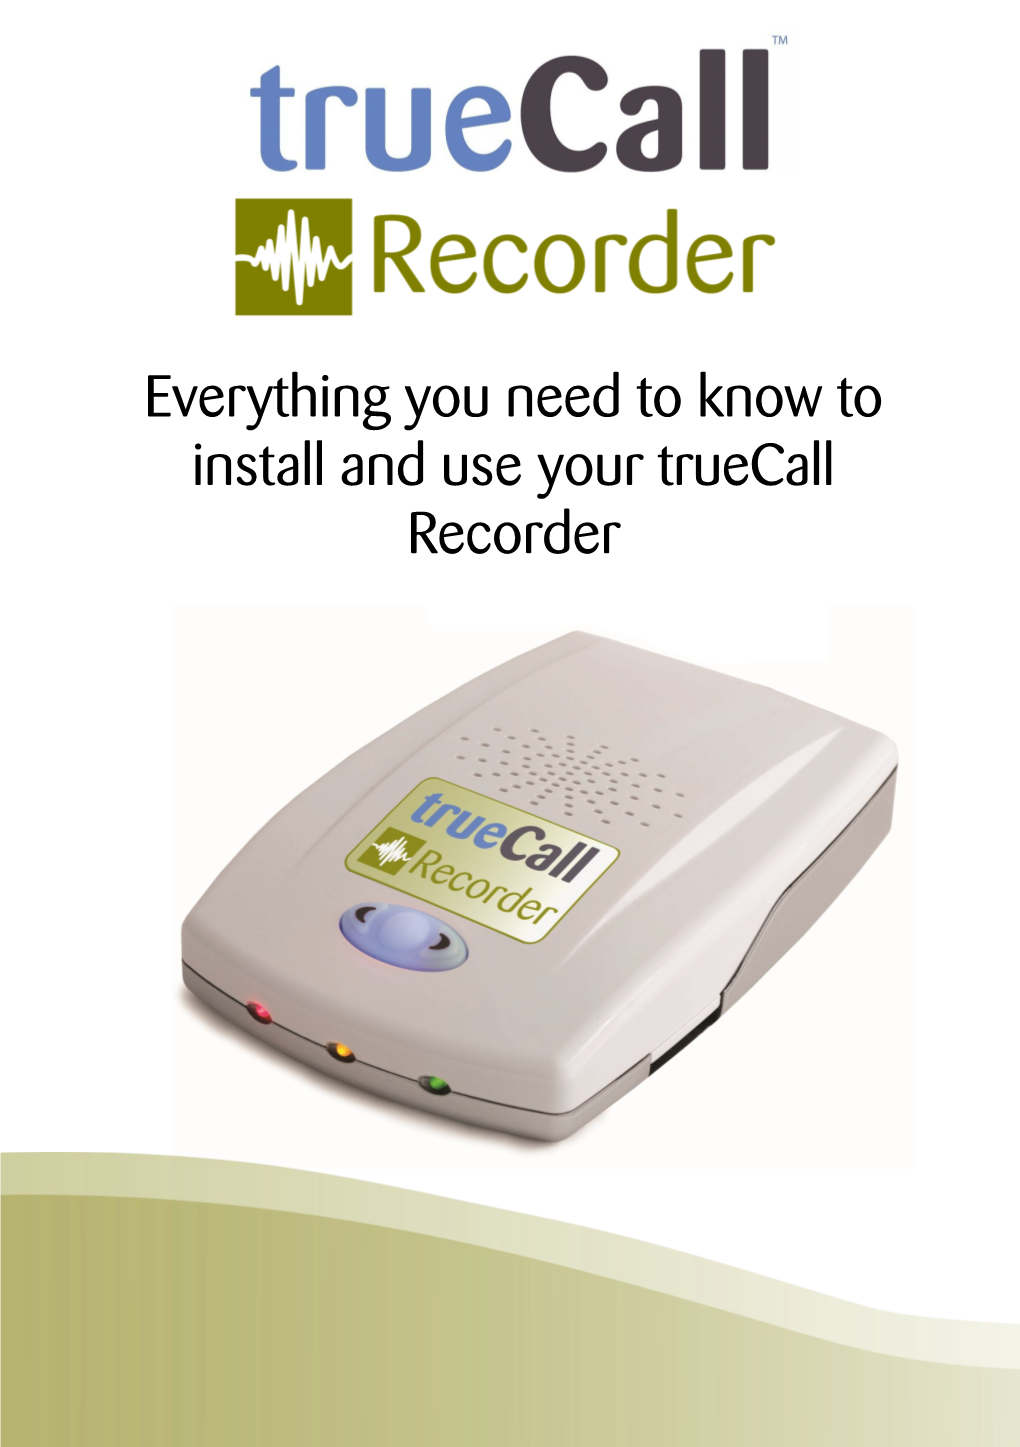 Everything You Need to Know to Install and Use Your Truecall Recorder 2 Contents